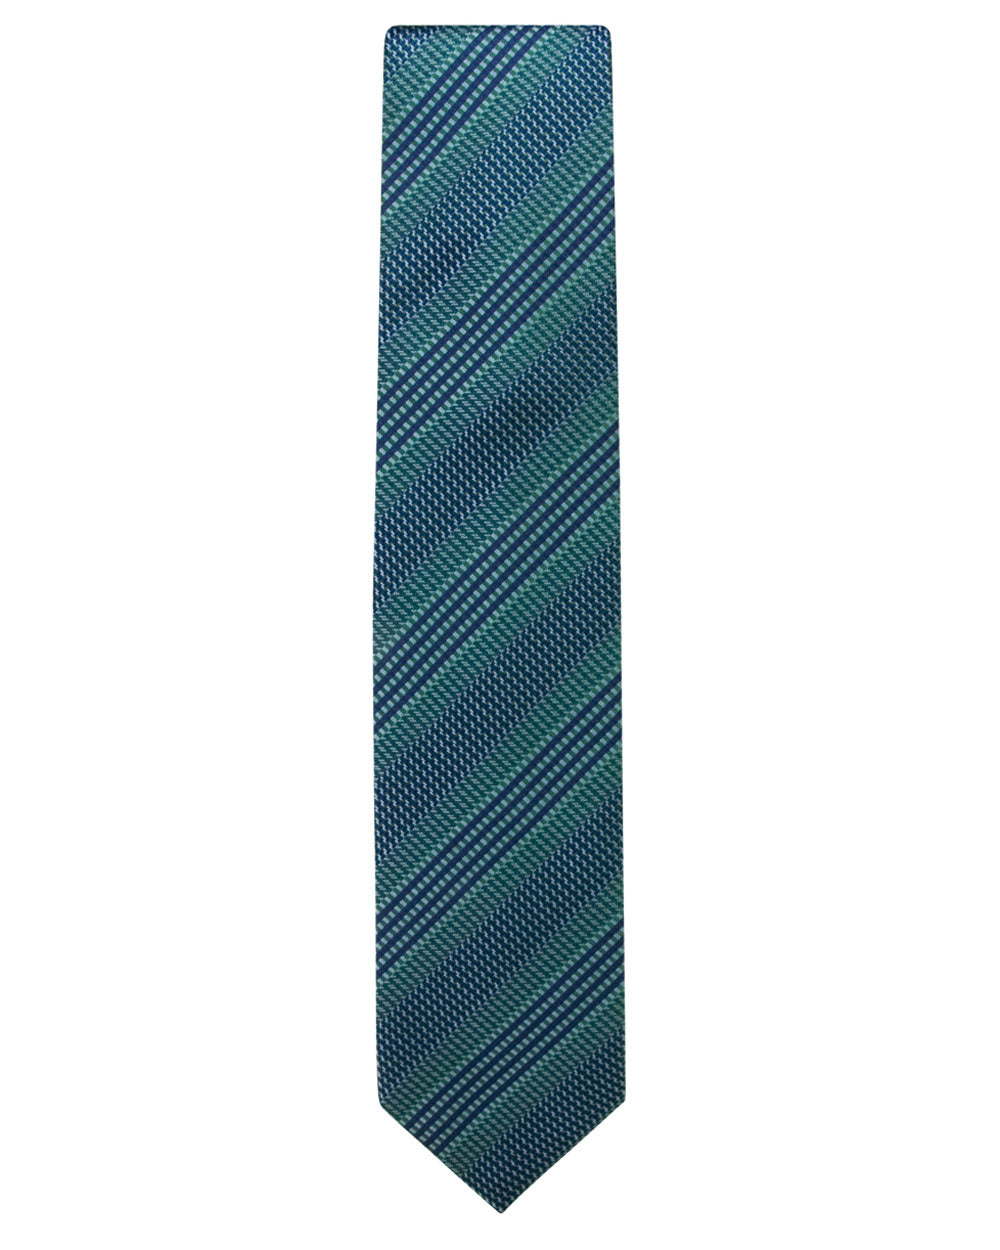 Navy and Seafoam Striped Tie